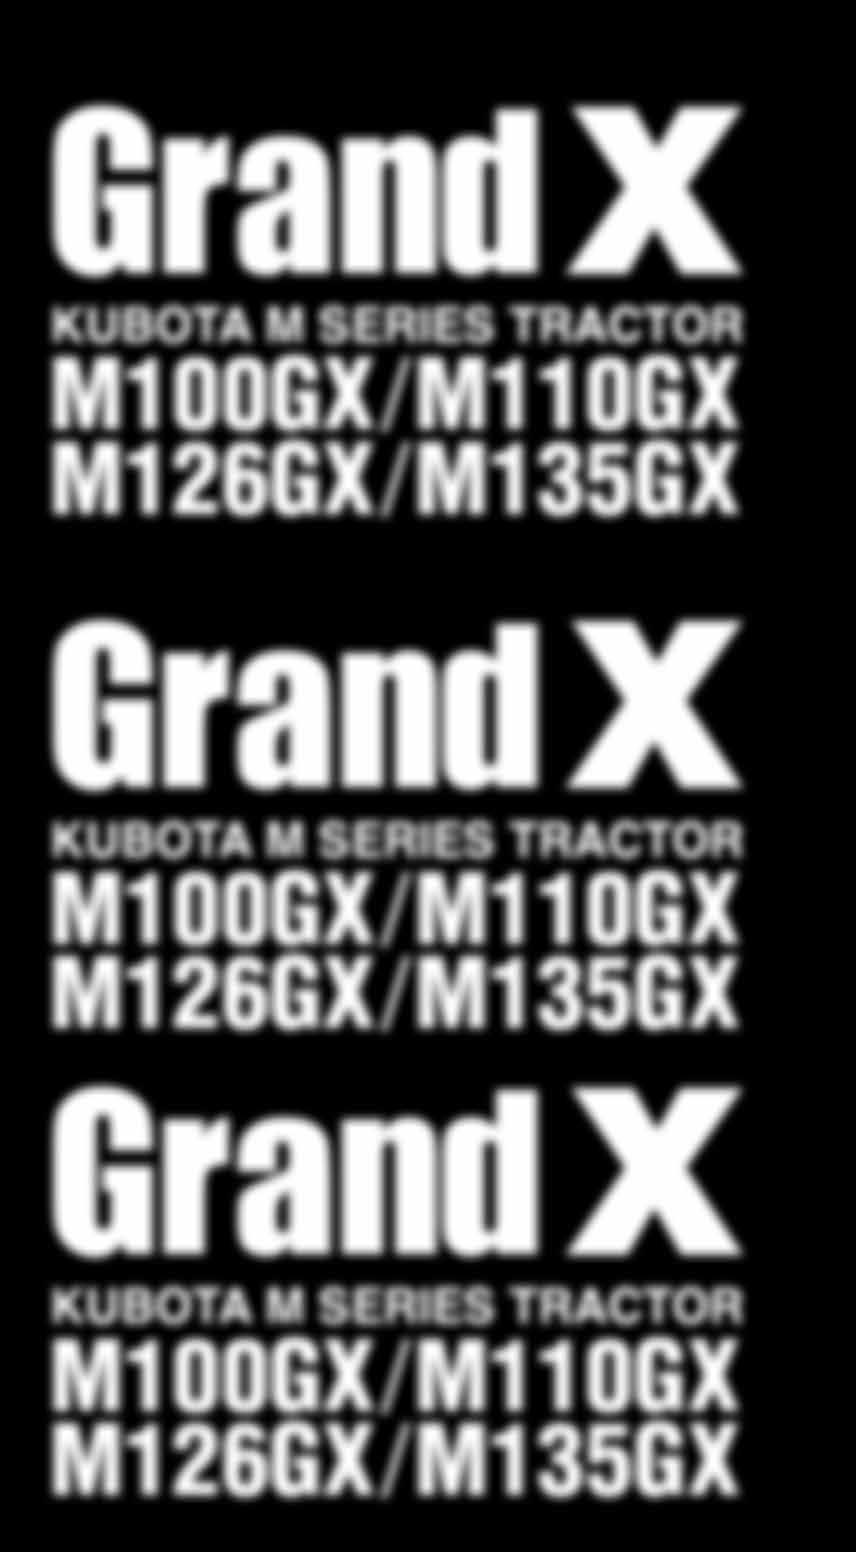 ADVANCED CONTROL Take full advantage of the Grand X tractors' performance with the